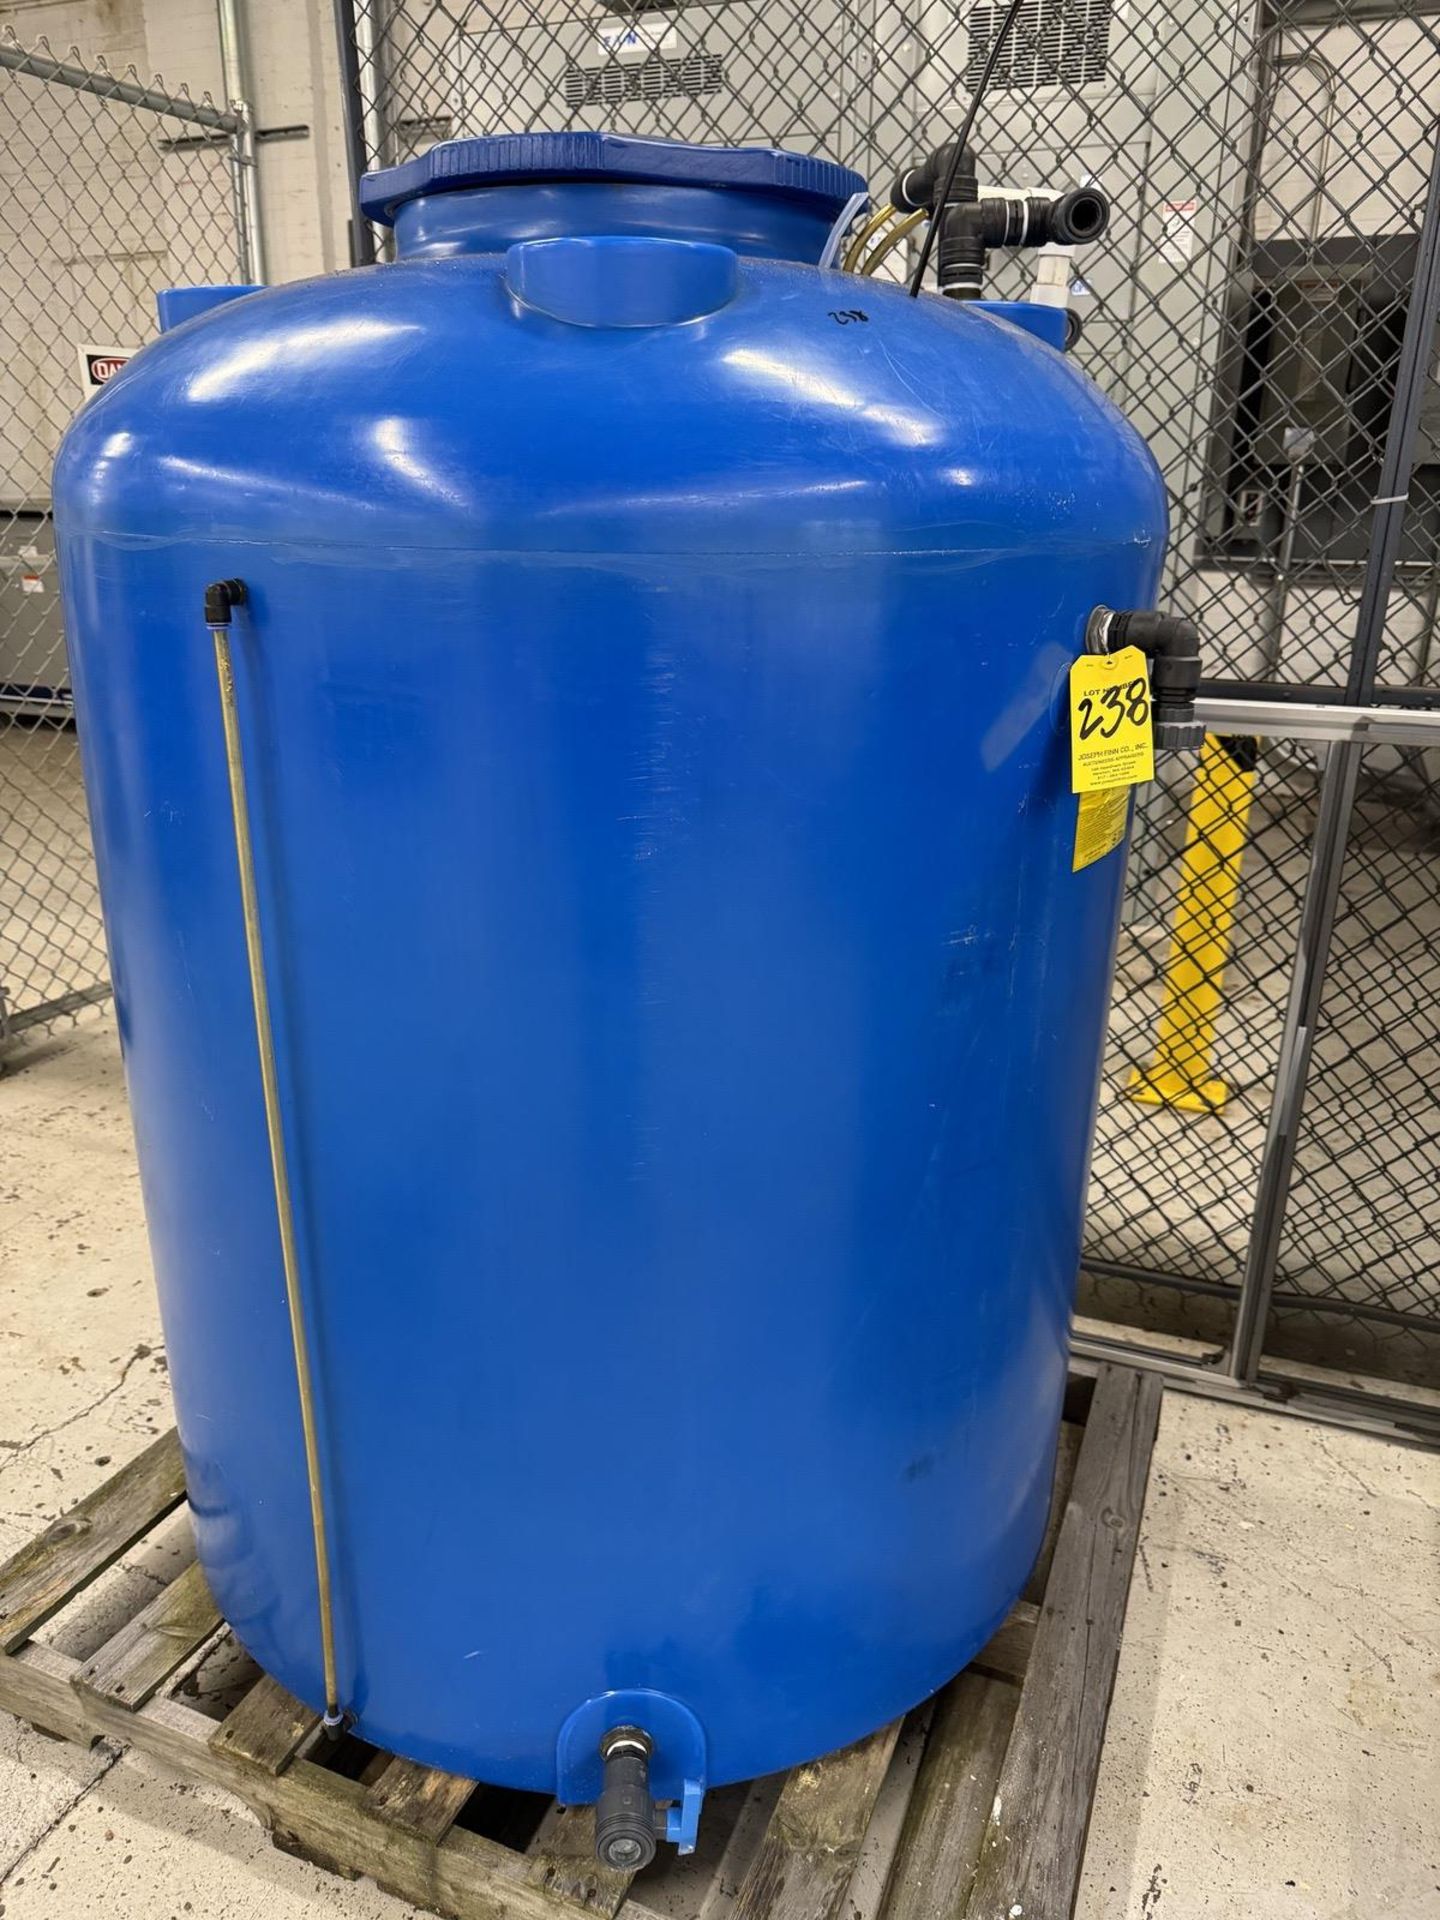 Blue Poly Storage Container 1,000 Liter, Valve Connector